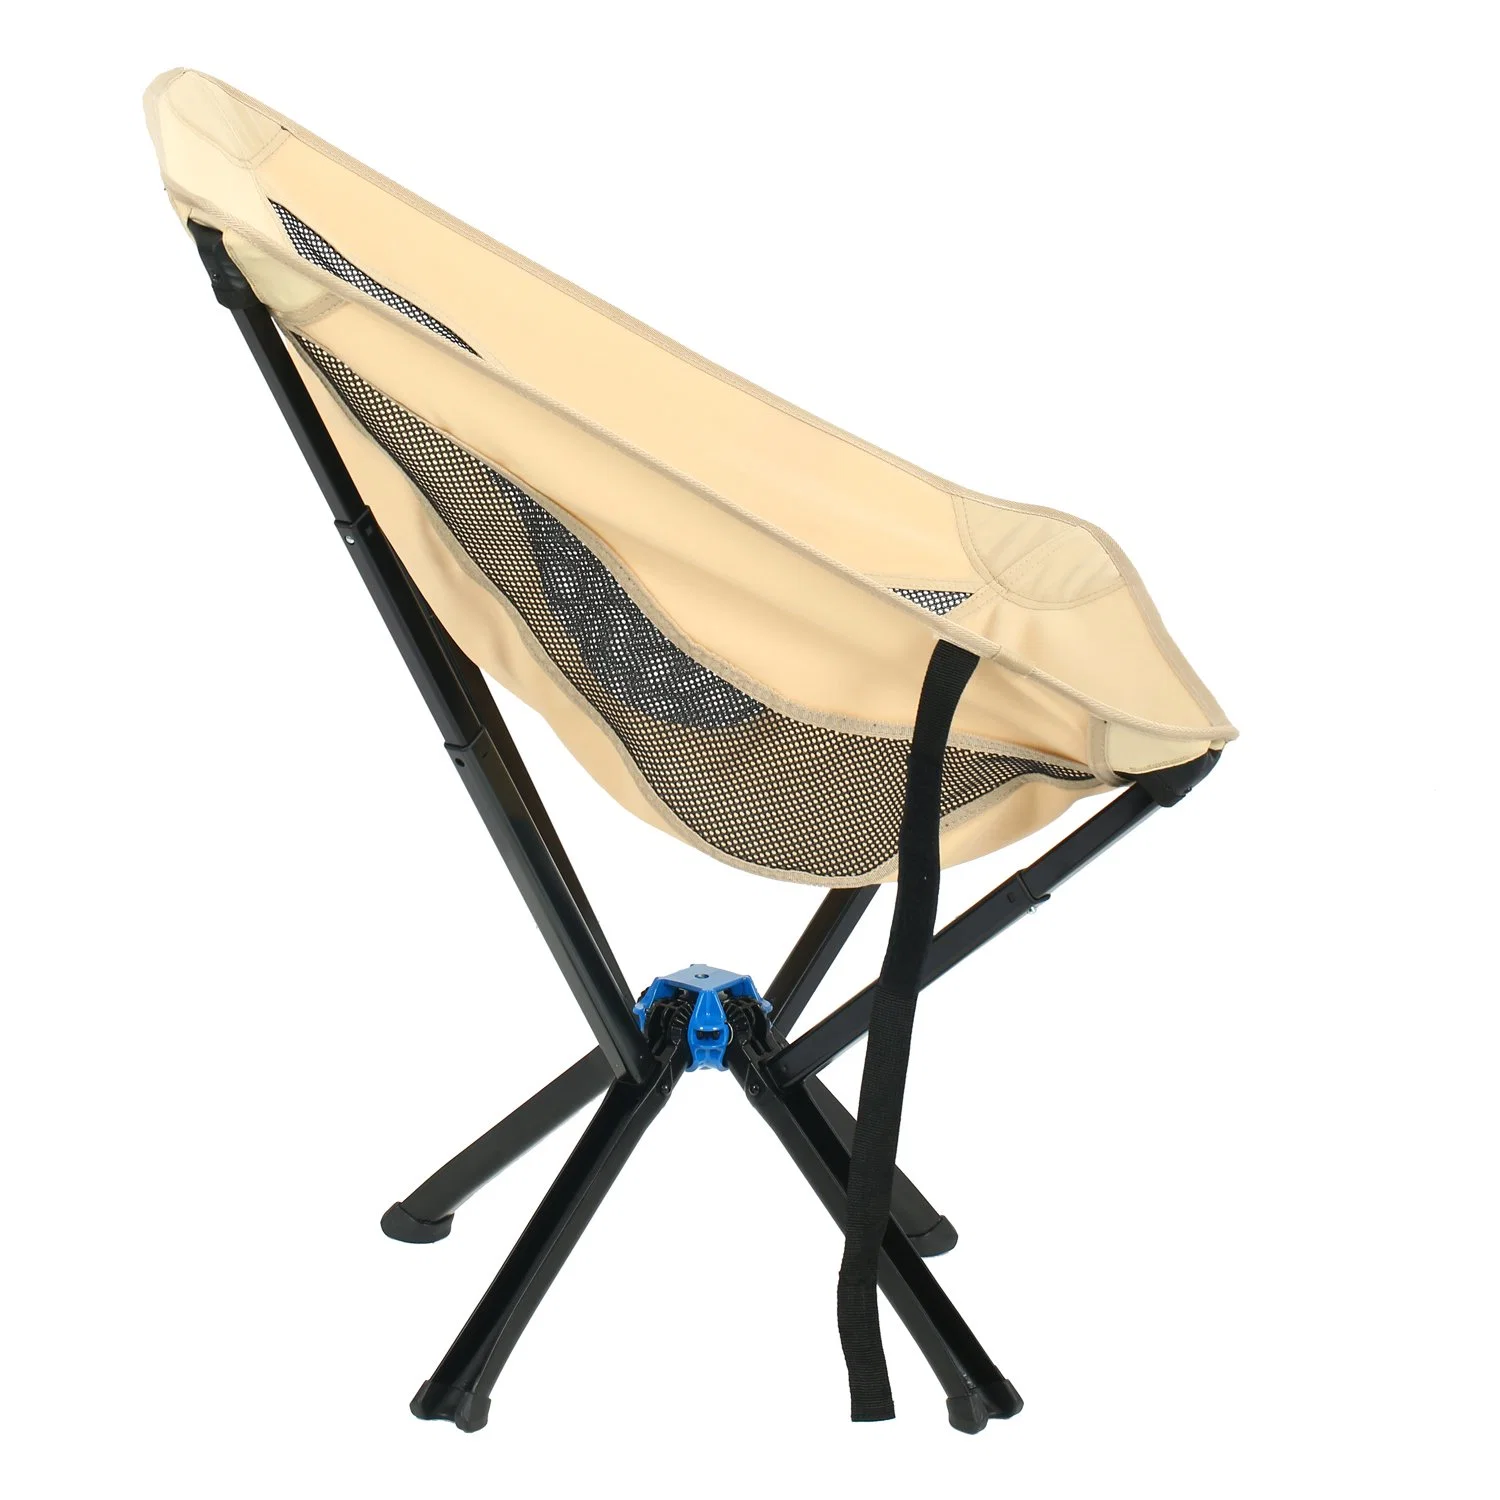 Anywhere Chair Camping Chair Small Size - a Portable and Versatile Folding Chair for Adults.